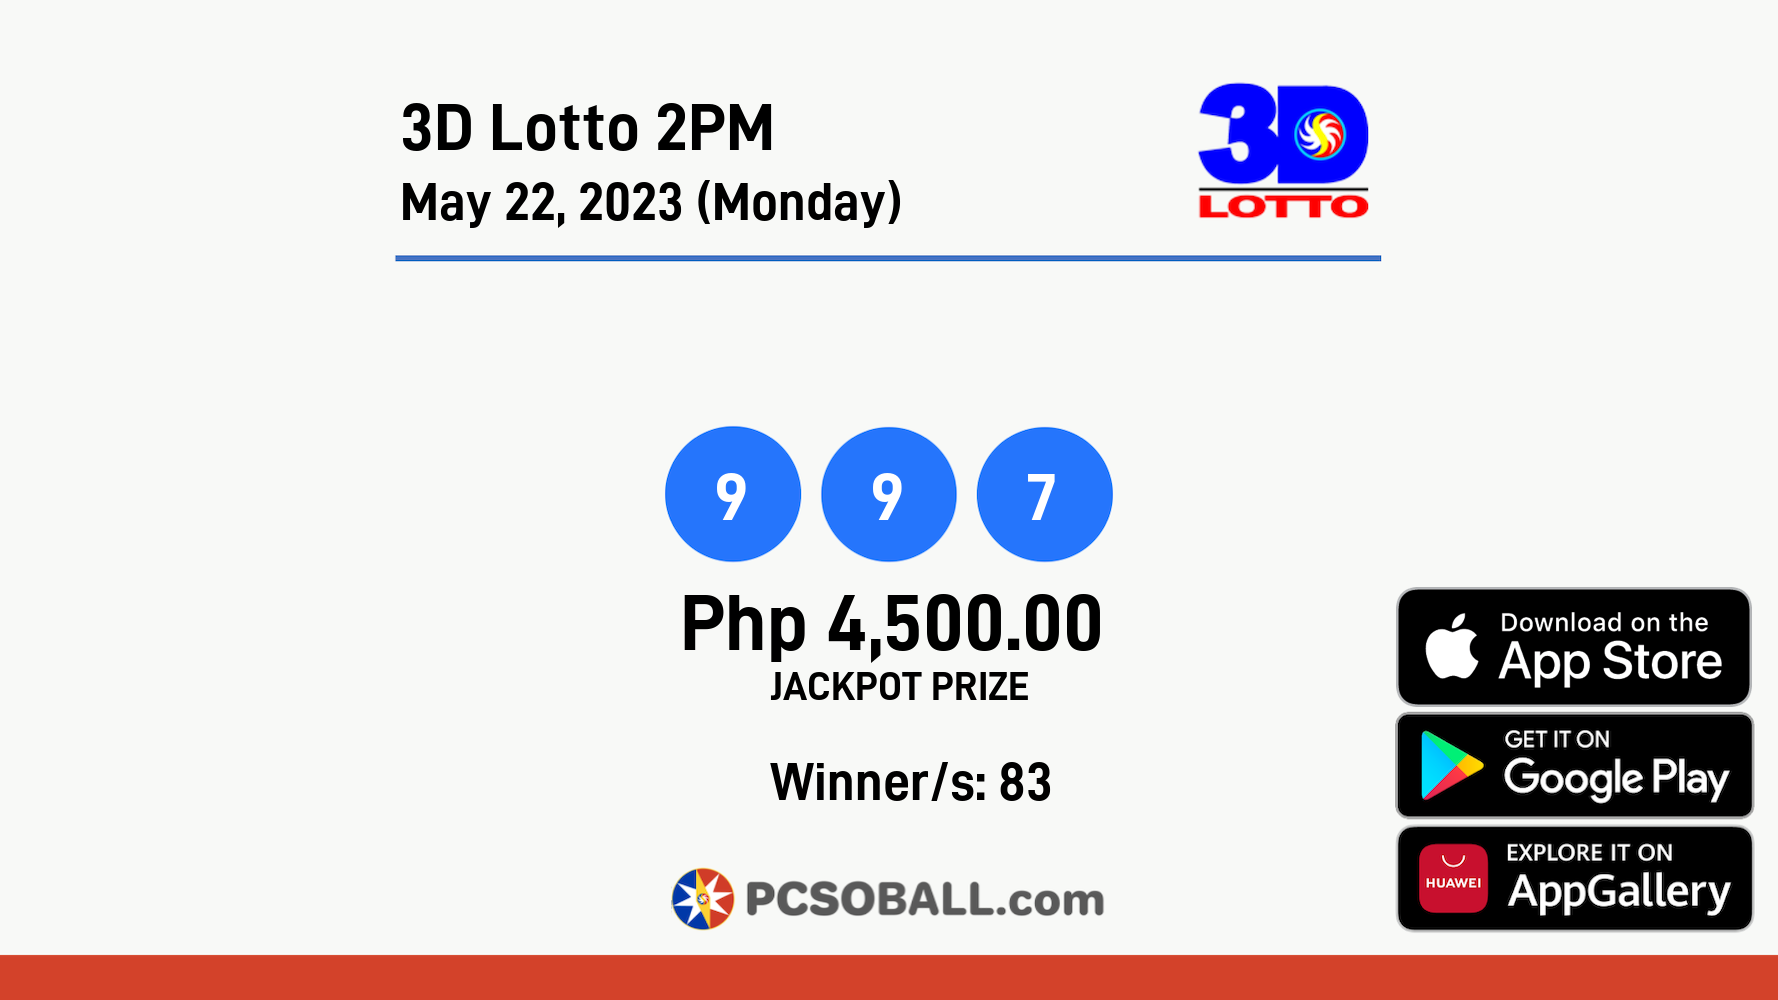 3D Lotto 2PM May 22, 2023 (Monday) Result